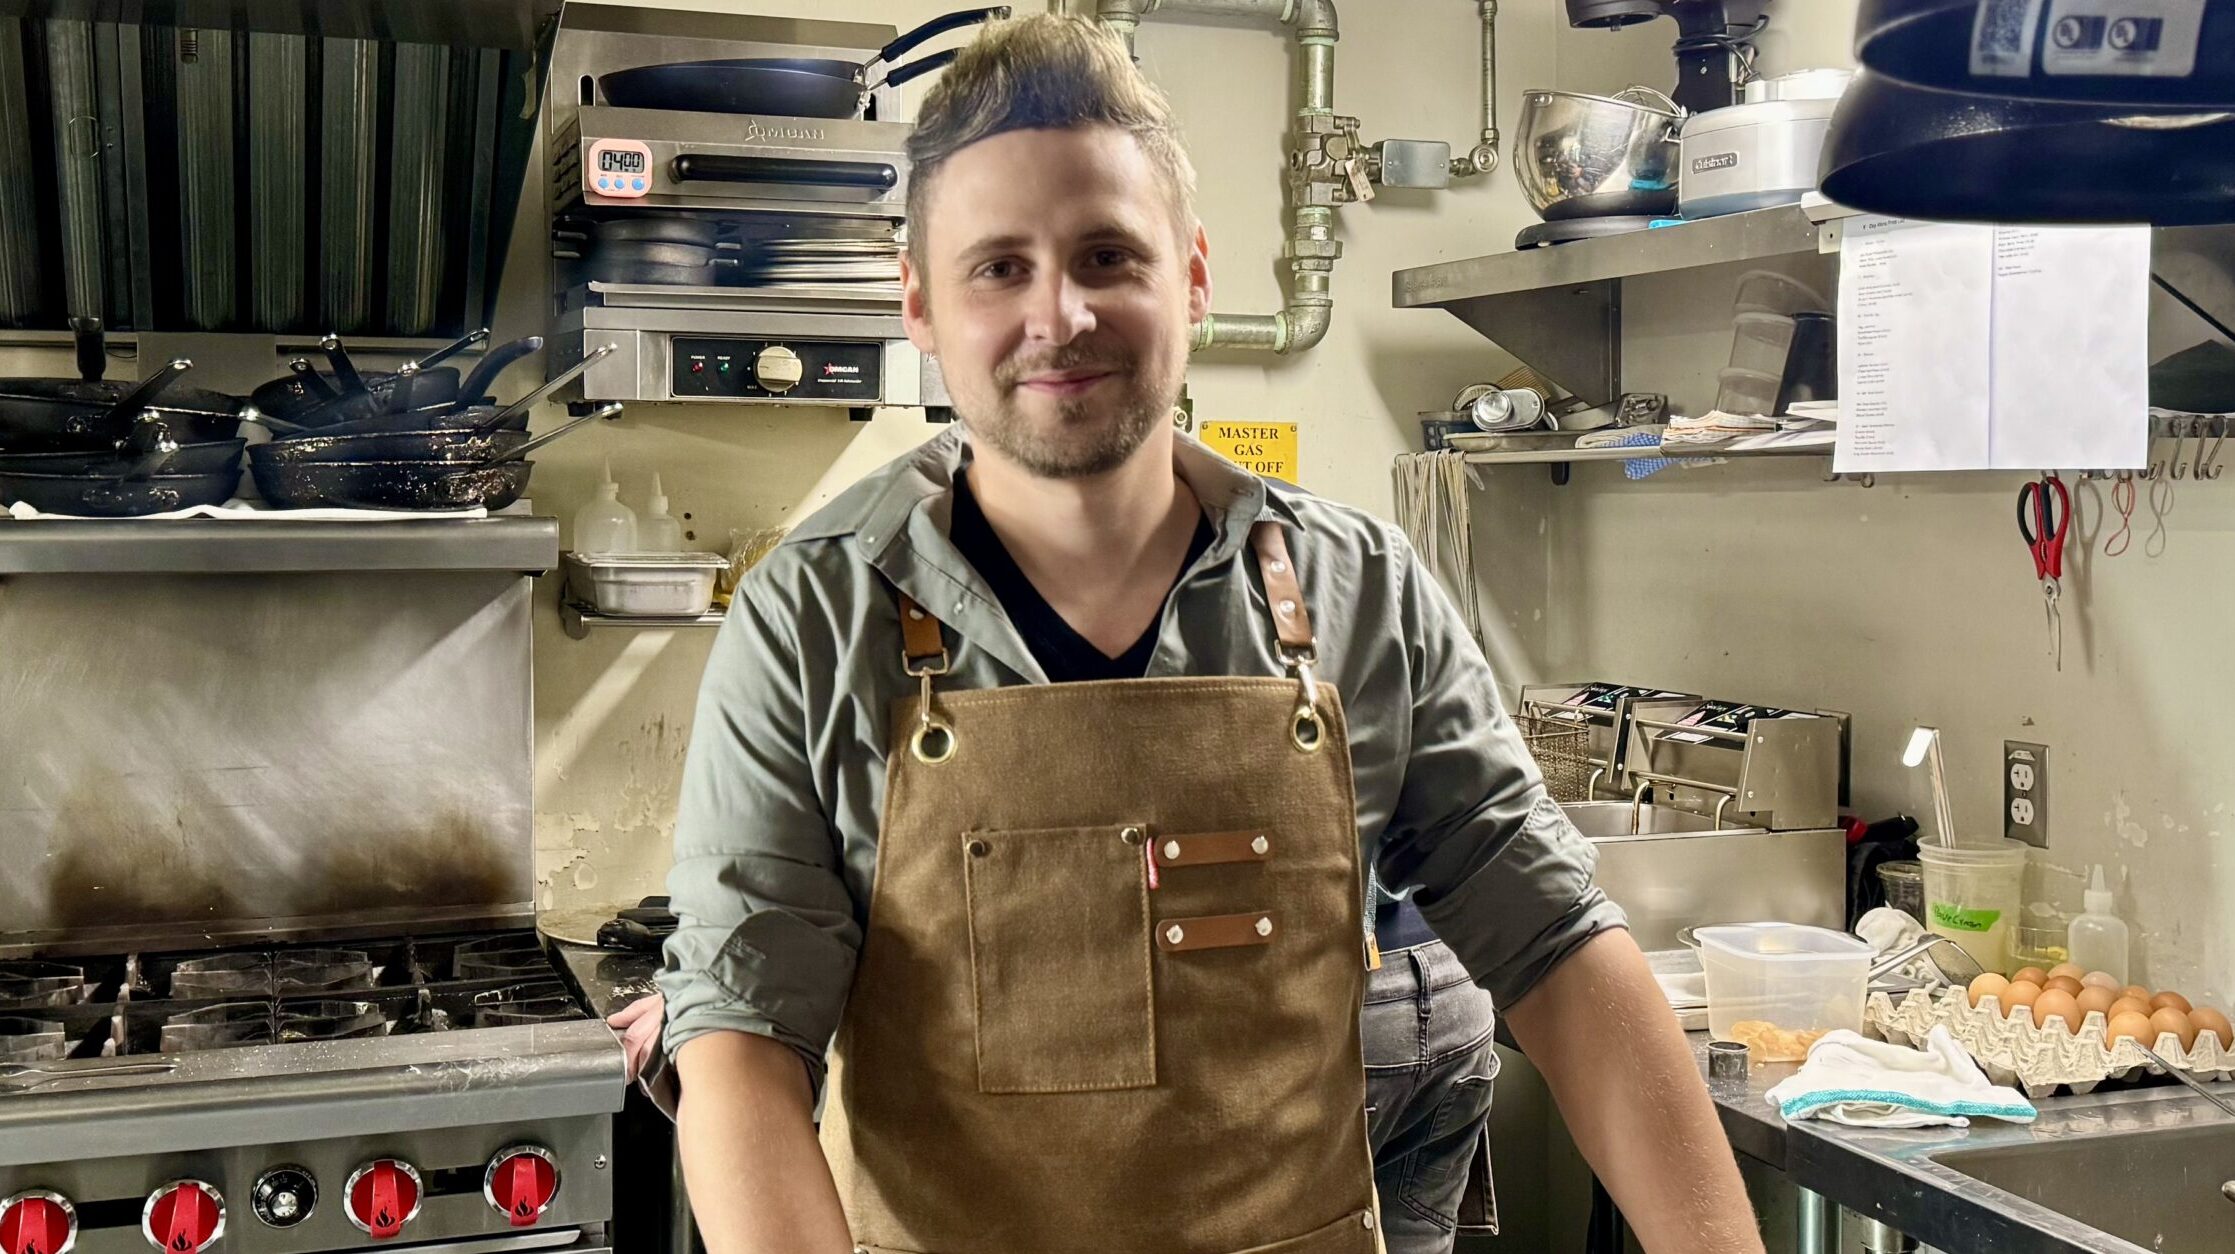 Man in a green shirt and beige apron stands in a kitchen smiling.